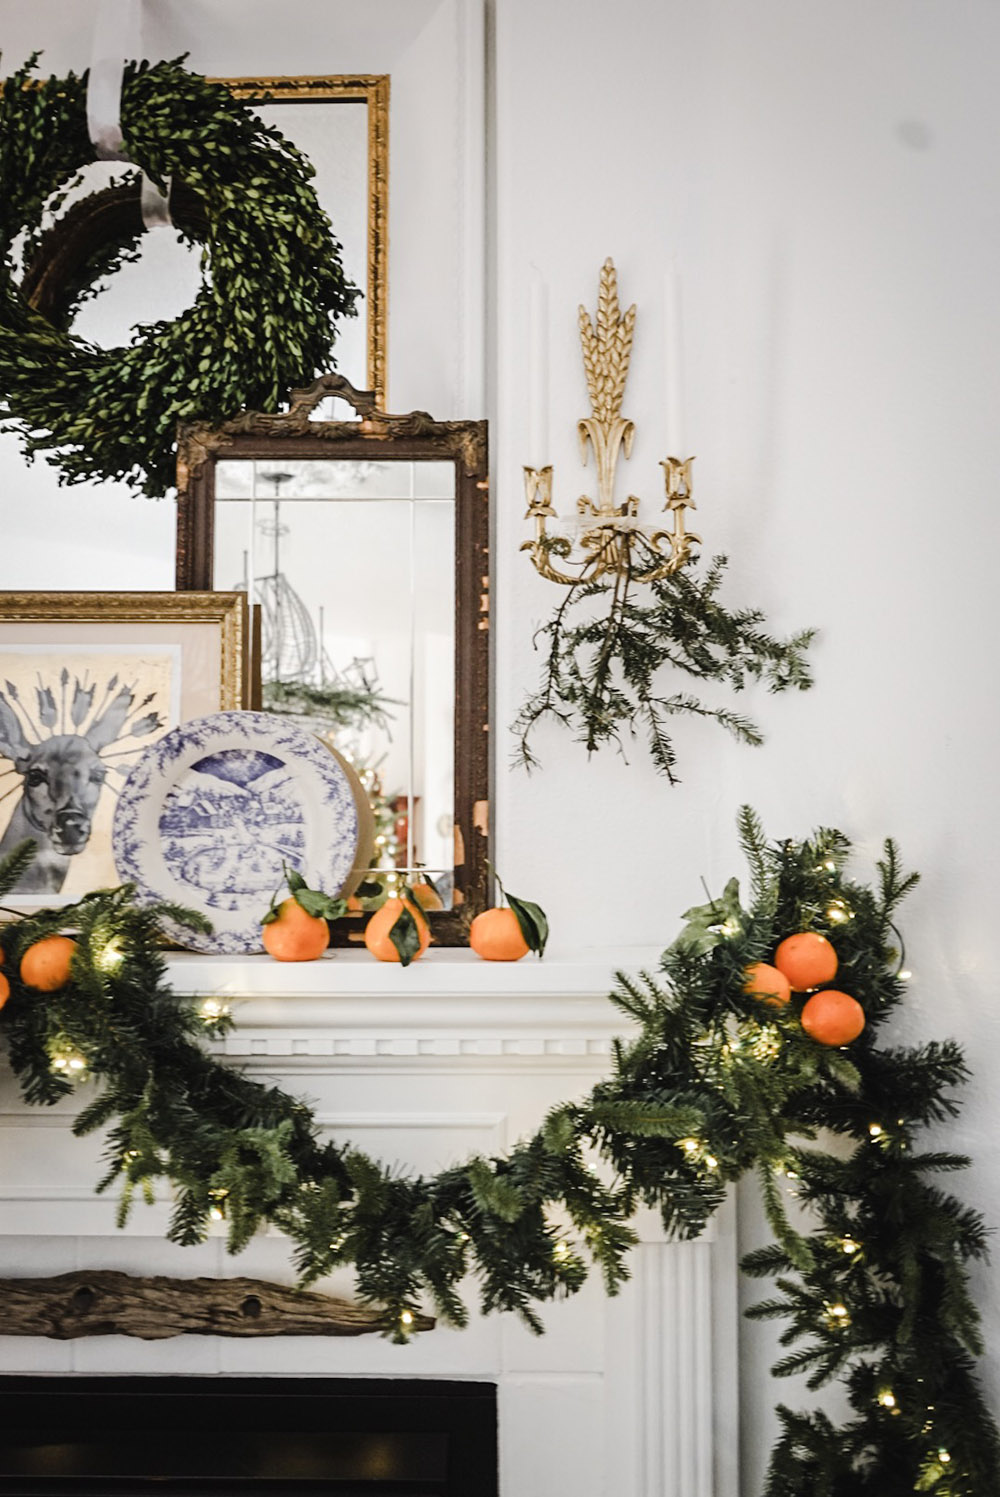 A fireplace mantel draped with garland and oranges.